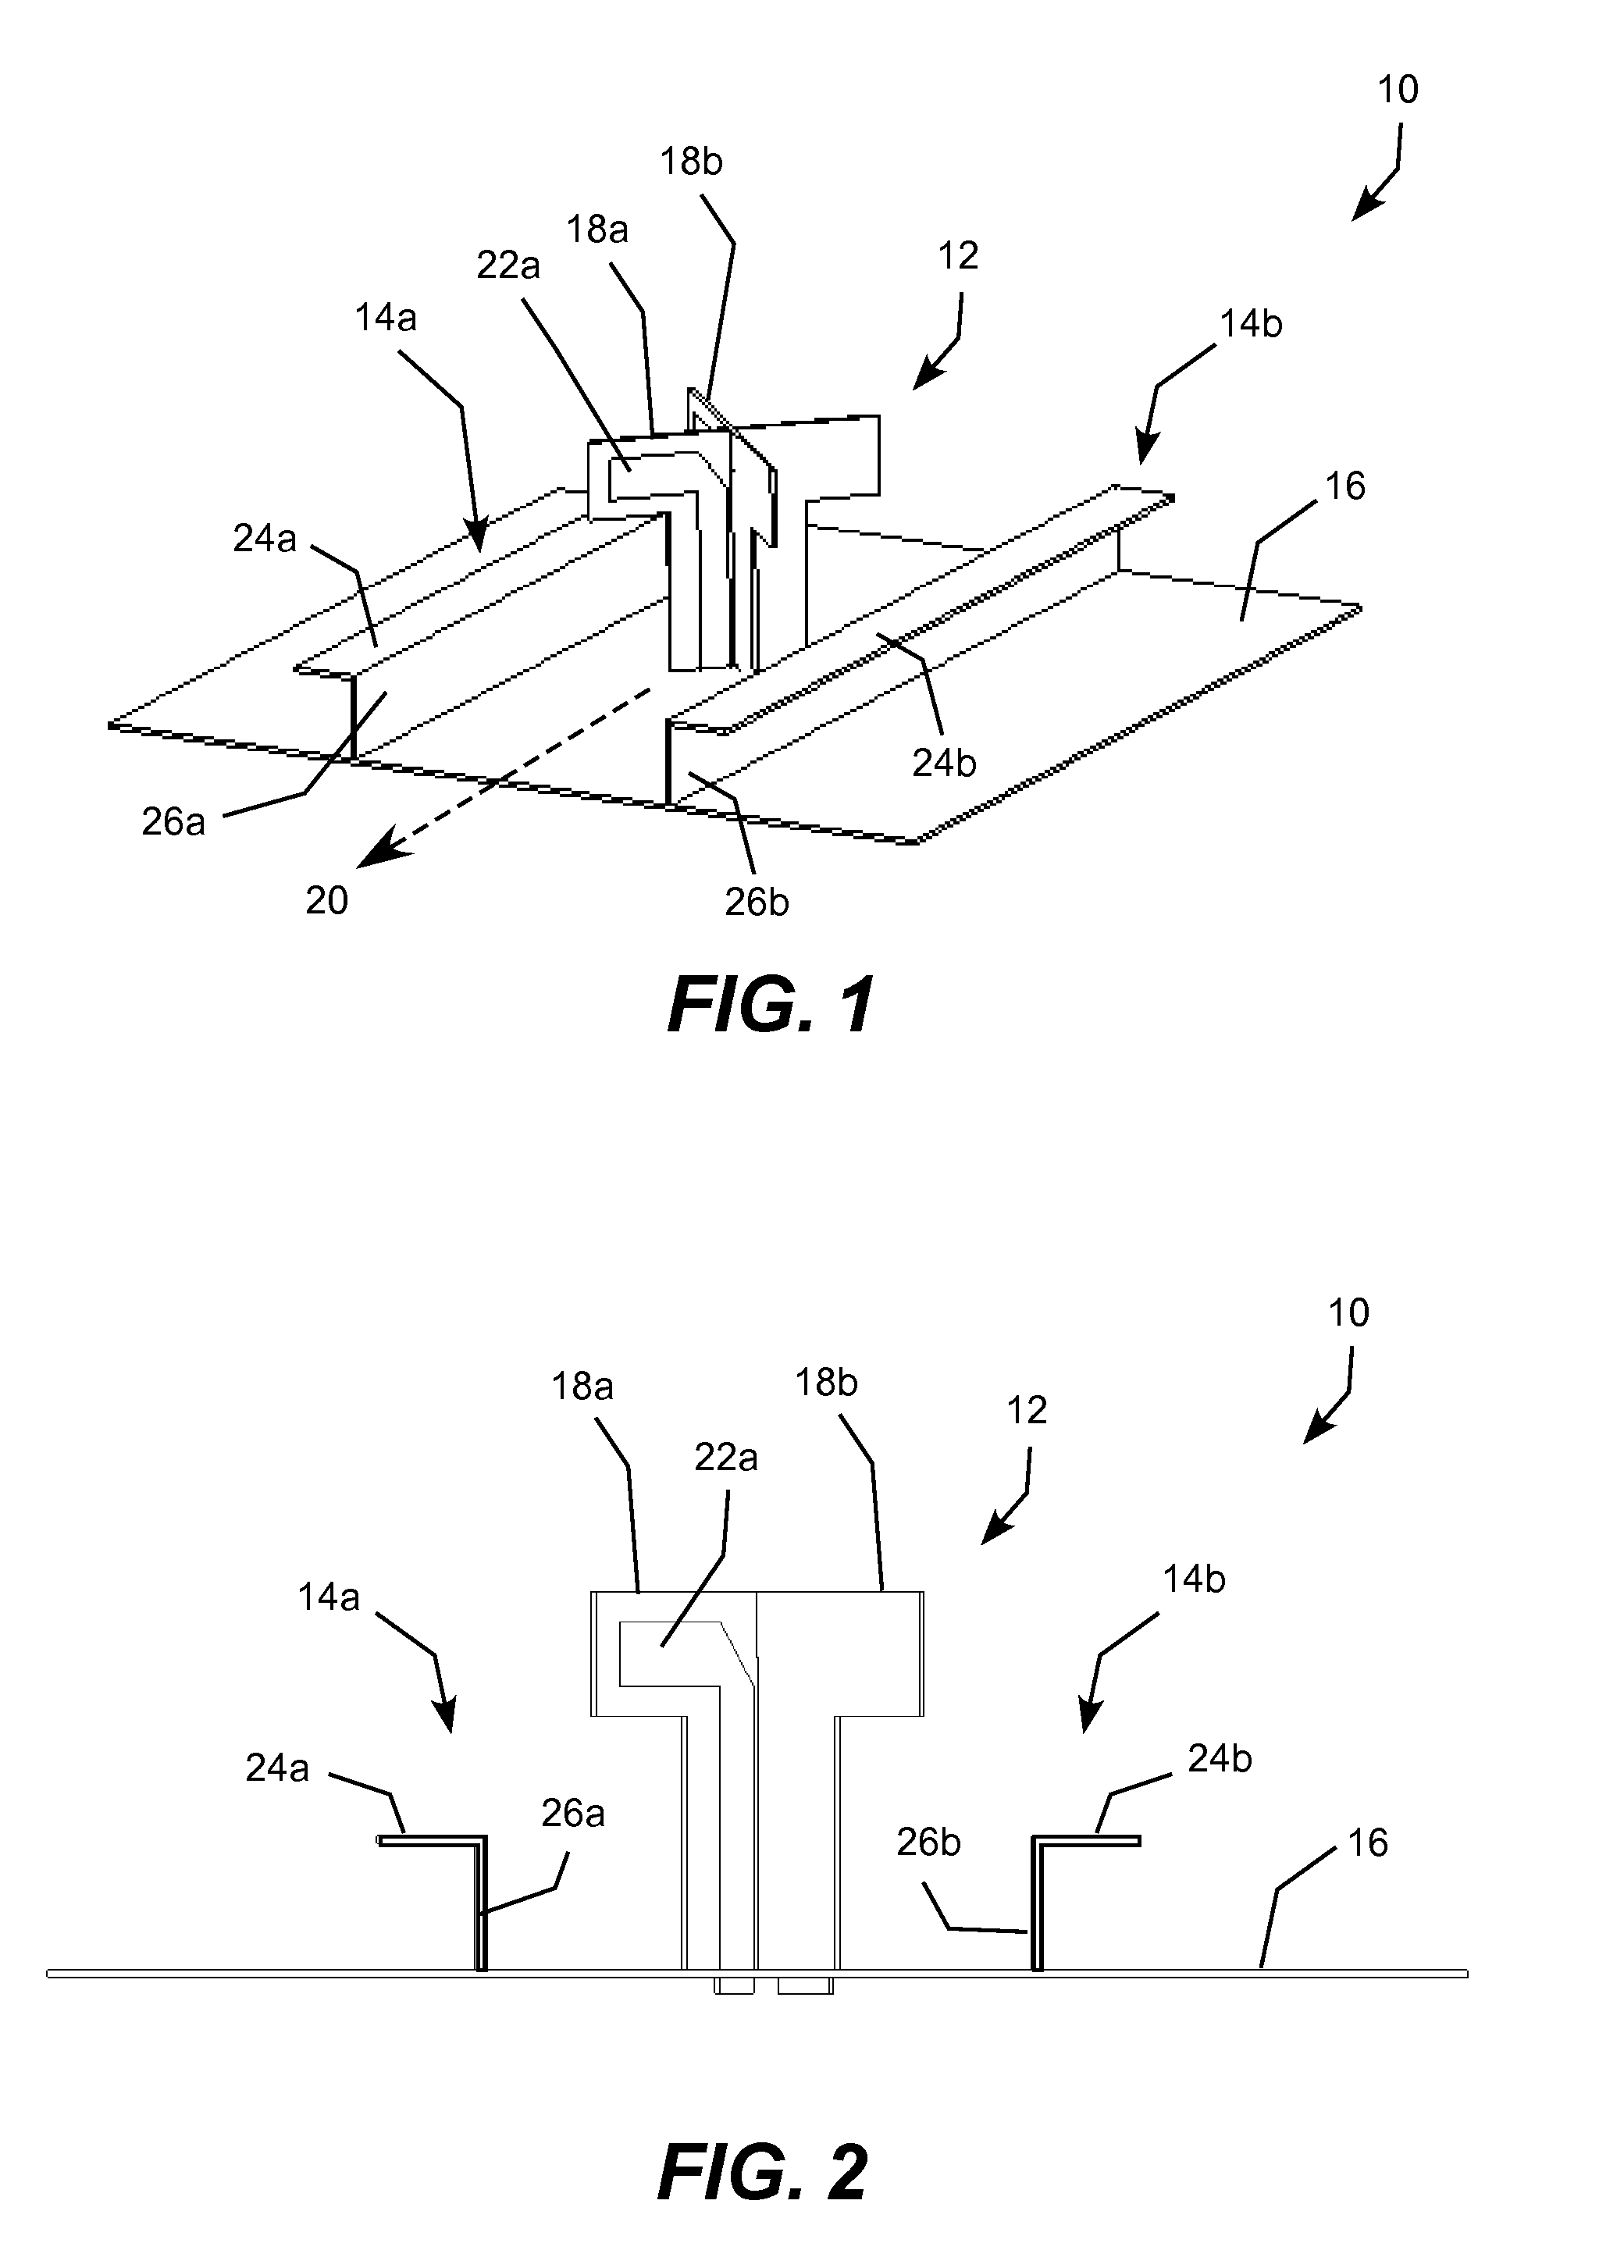 Base station antenna with beam shaping structures